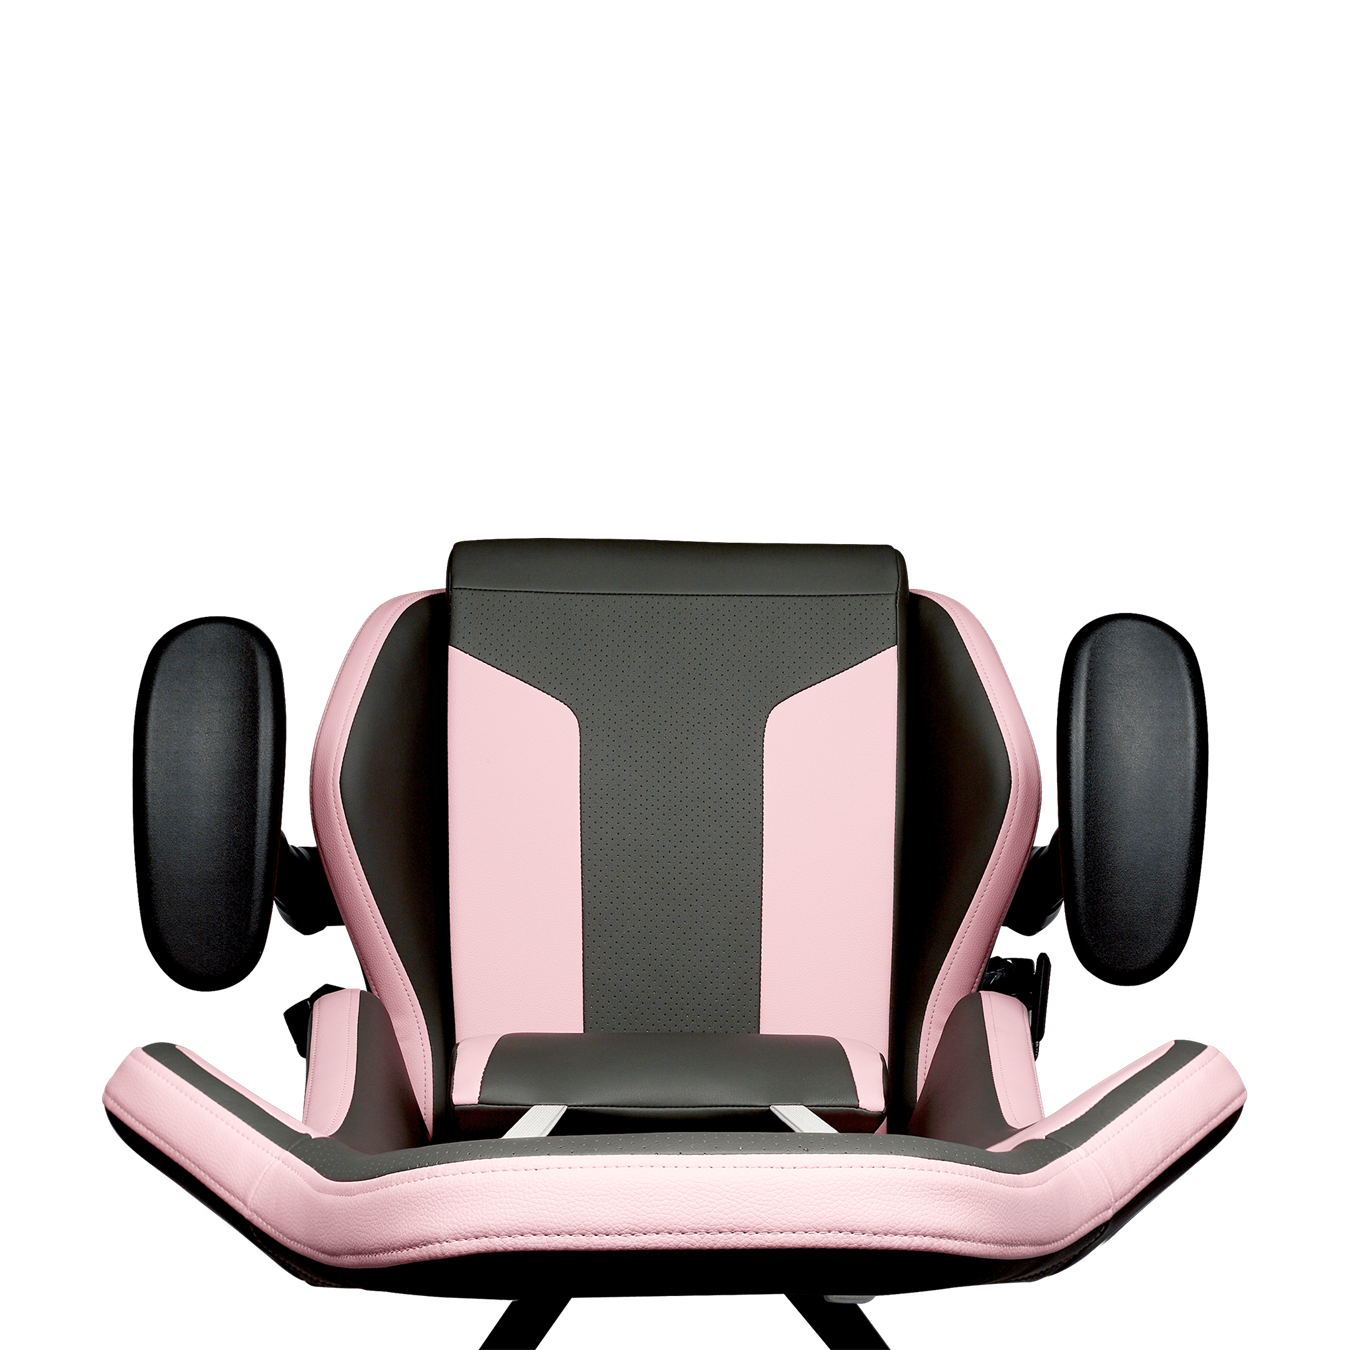 Caliber R1S Rose Grey Edition Gaming Chair - Top angle view